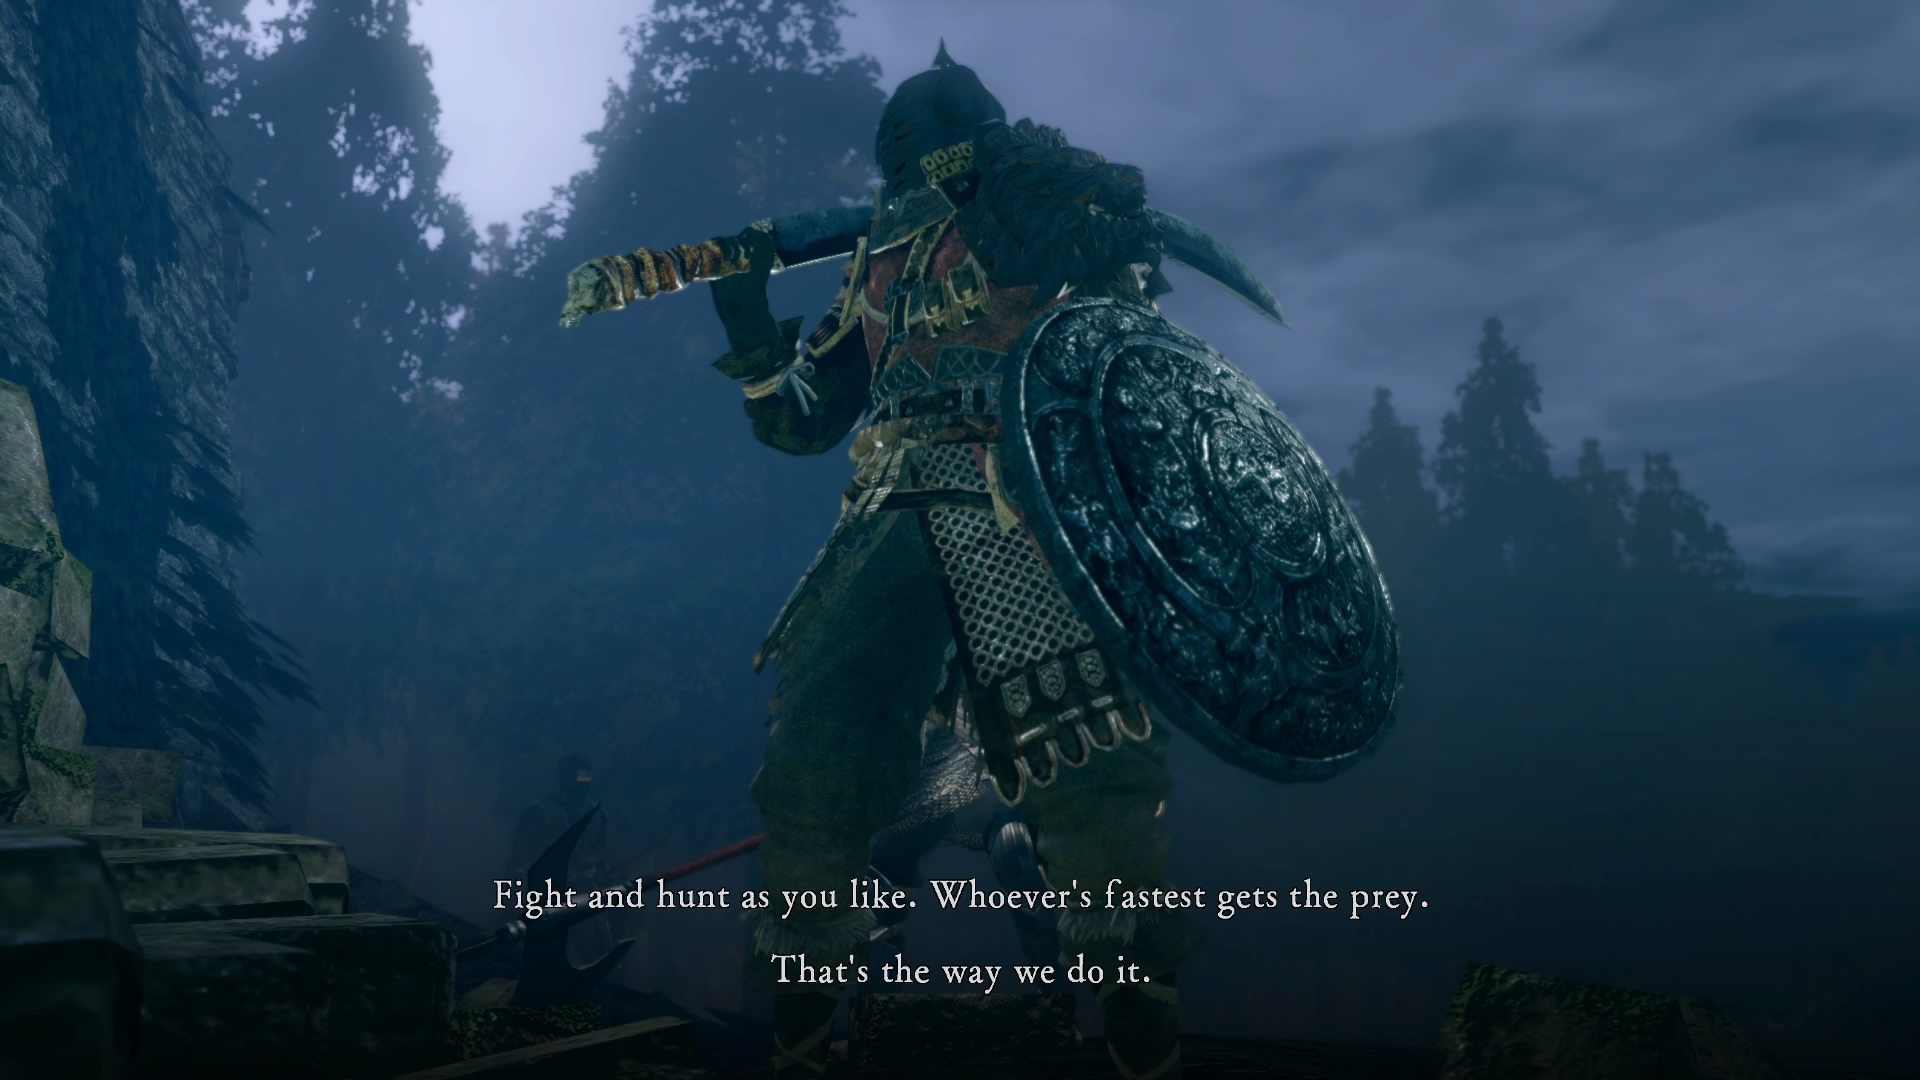 What's a Dark Souls quote that best describes your 2023? : r/darksouls